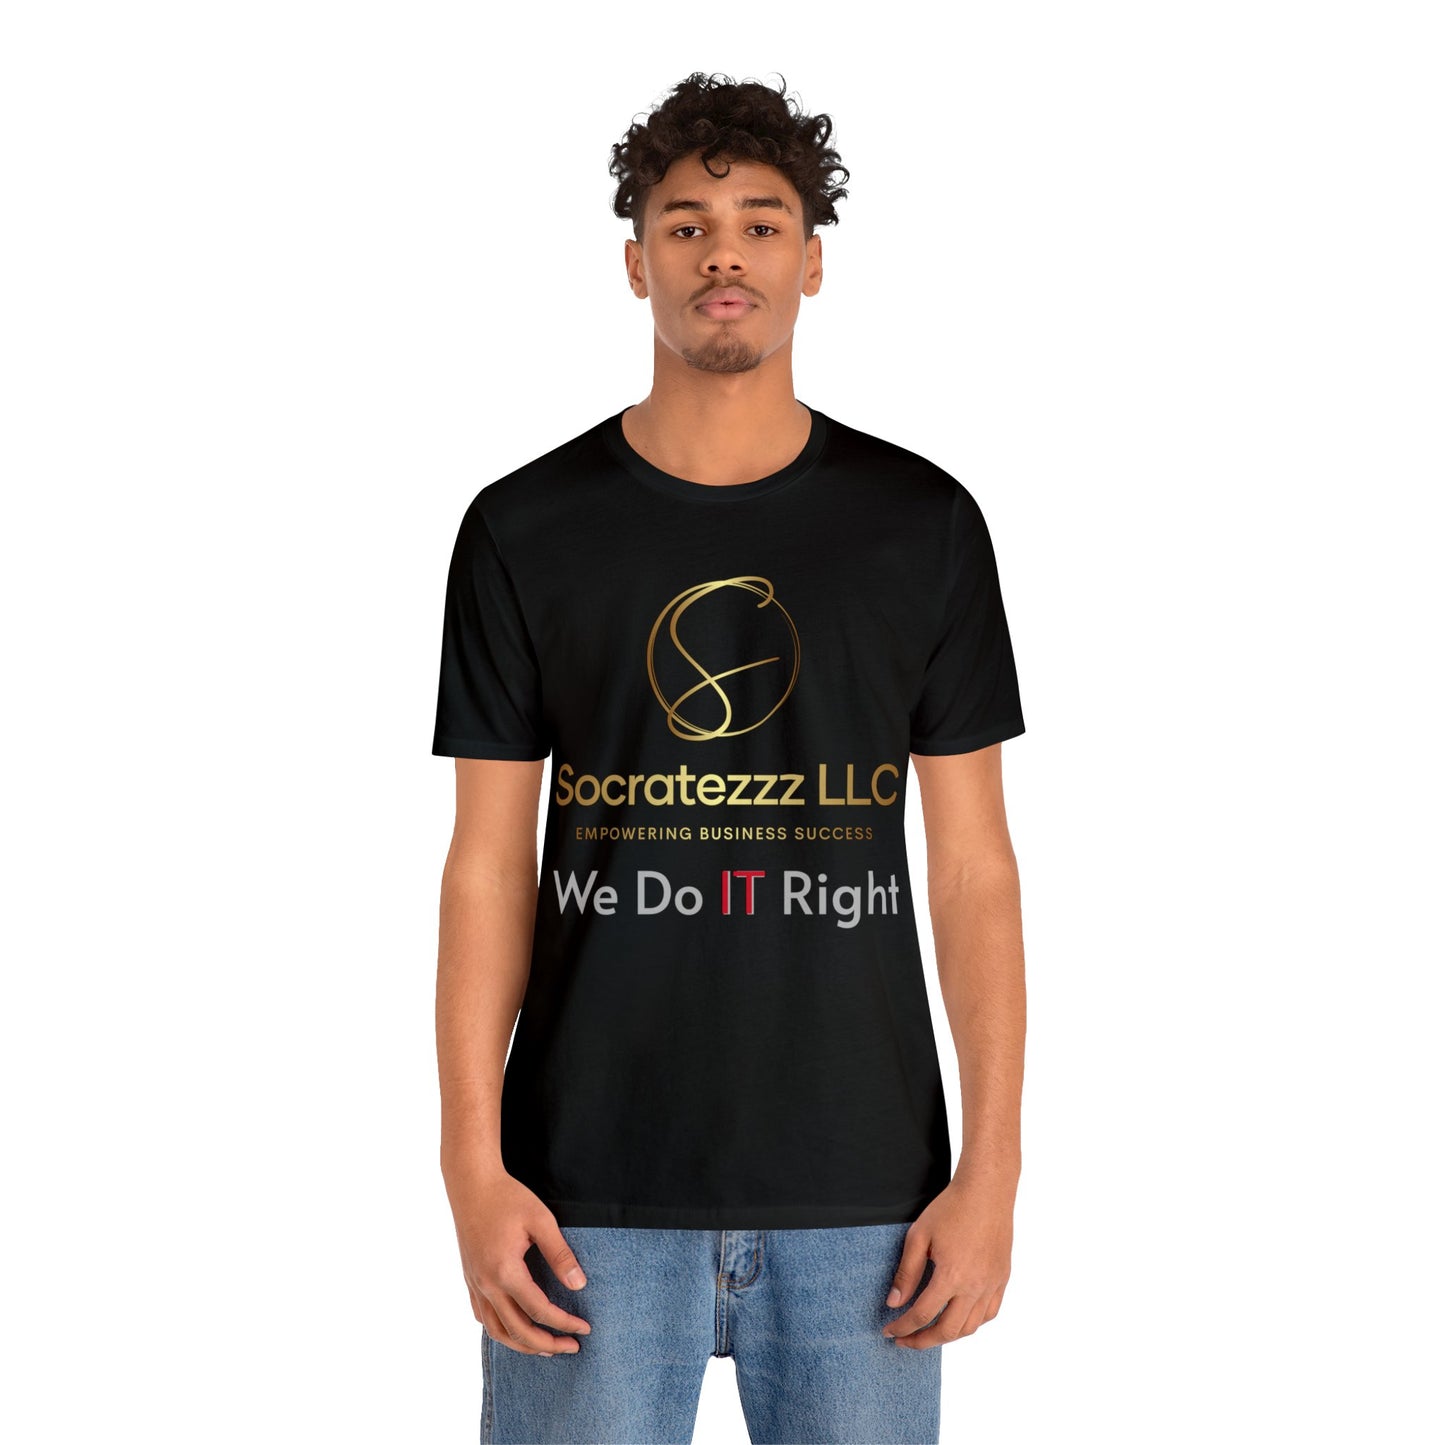 Socratezzz. We Do IT Right Colors - Unisex Jersey Short Sleeve Tee